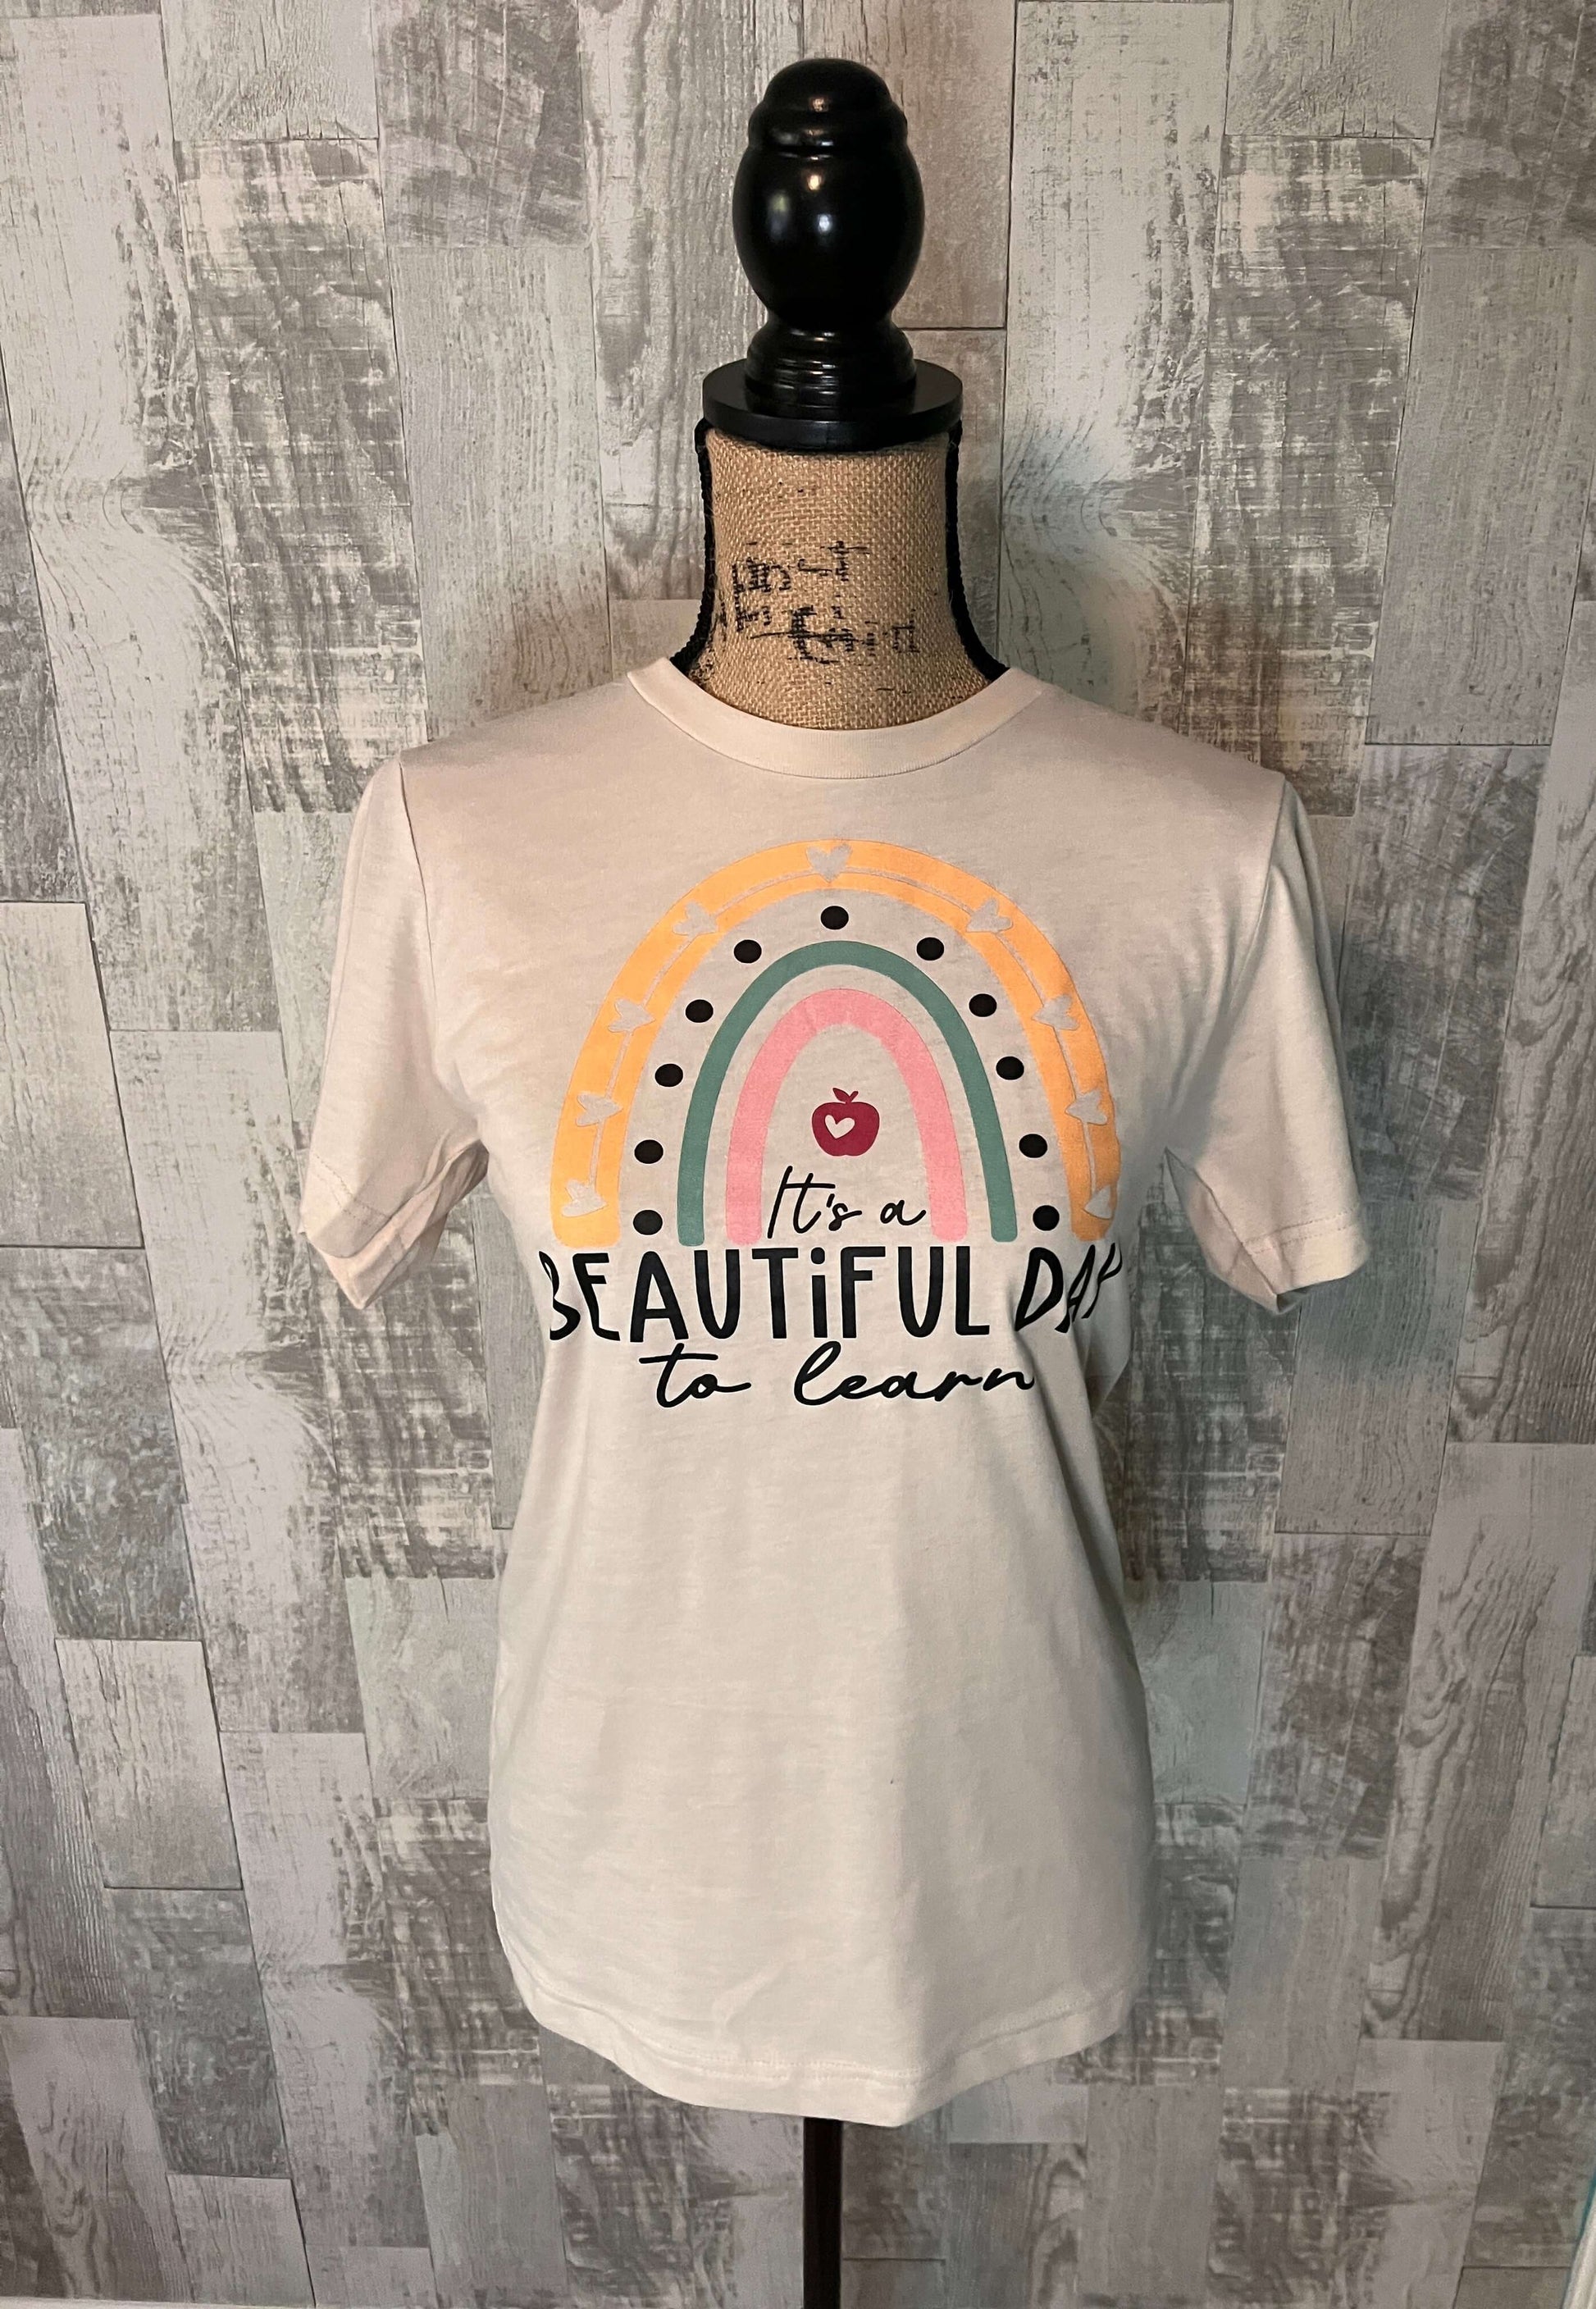 Shirt & Tops bella canvas, Bella Canvas tee, clothing, gift, gift corner, gift list, gifts, graphic, graphic tee, Graphic Tees, shirts & Topsgraphic tees, teacher gift ideas, teacher gifts, teacher graphic tee, the gift corner Size: Small, Medium, Large,